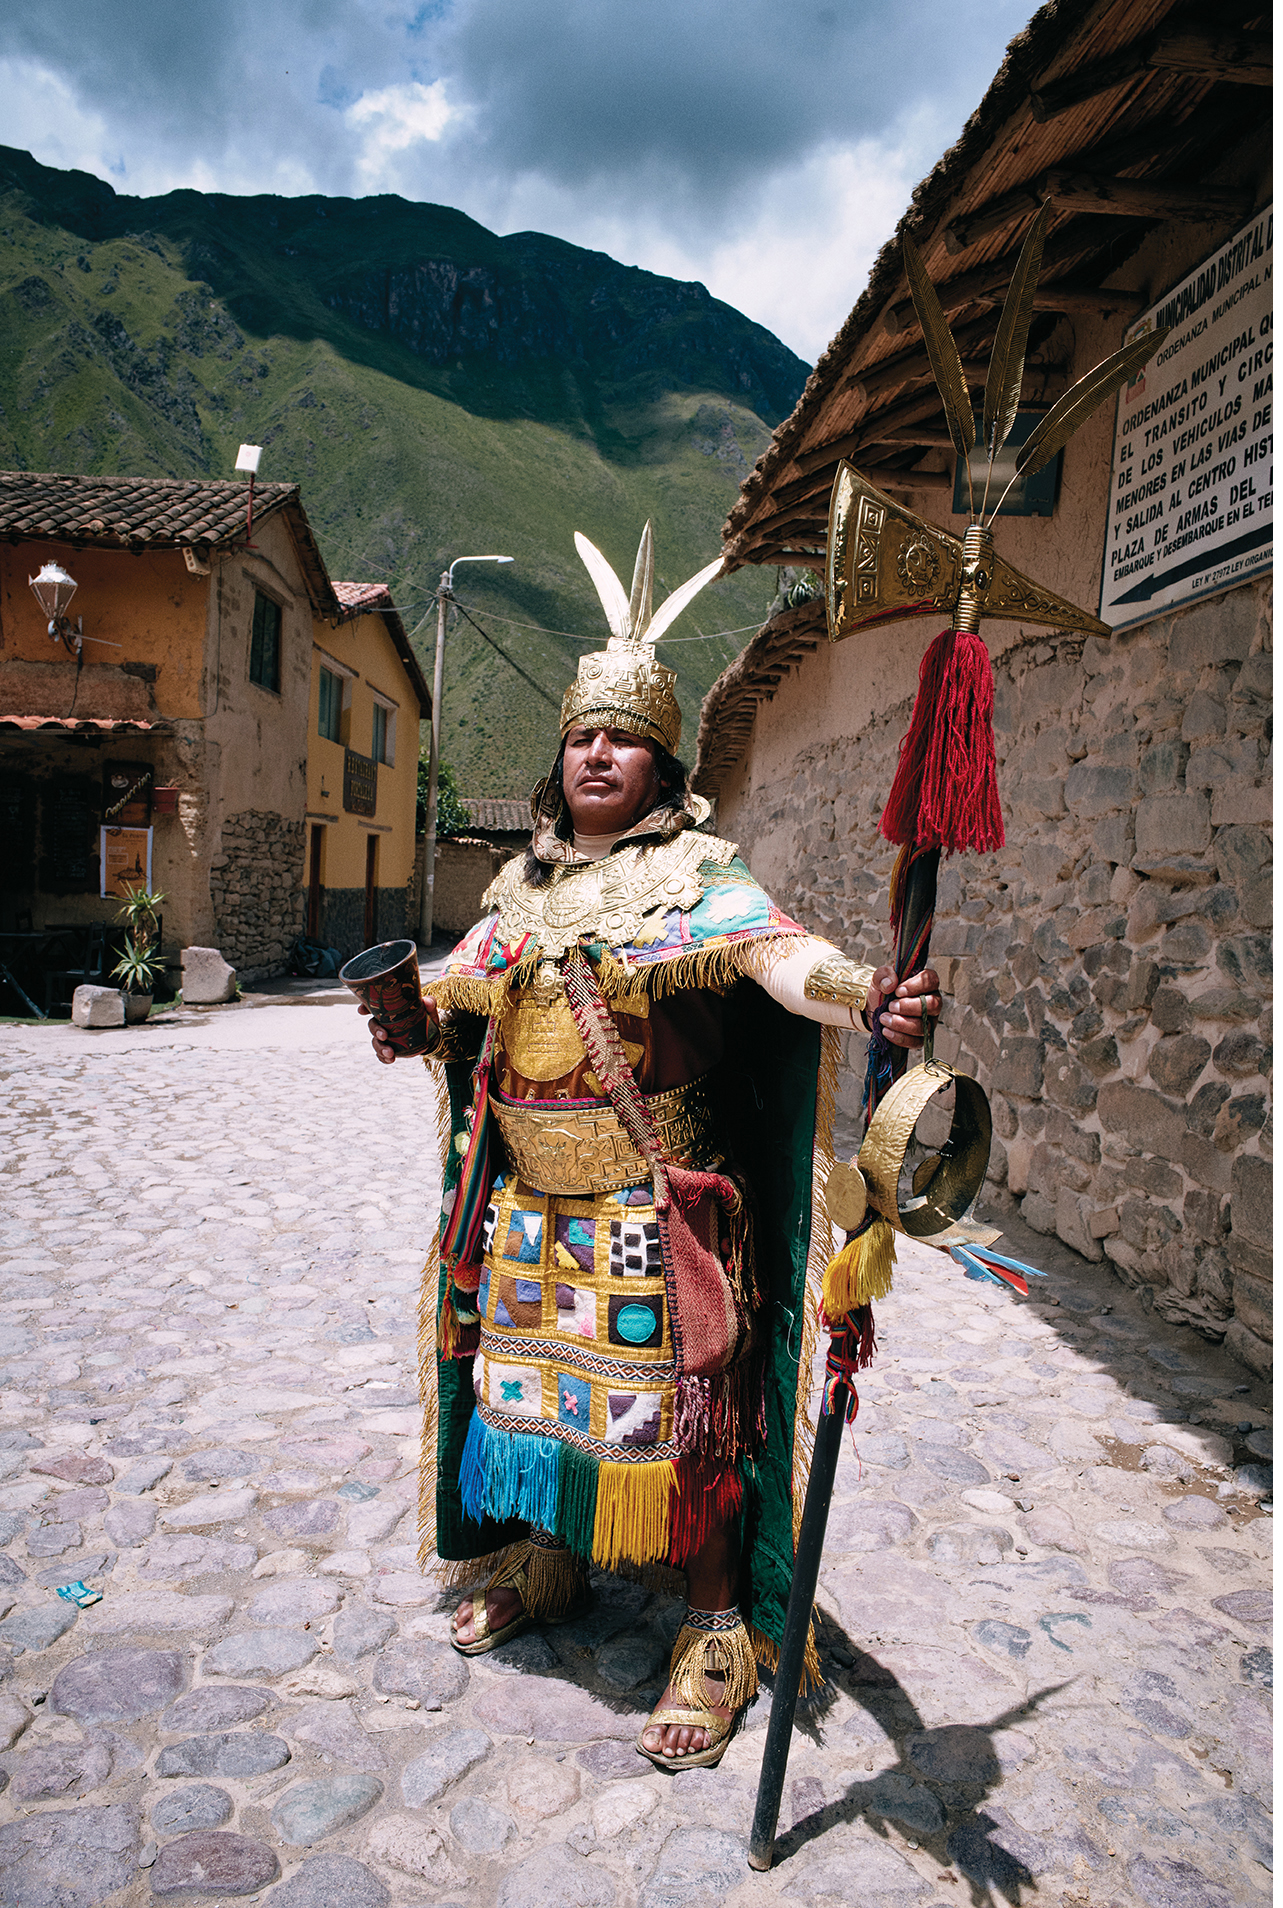 Actor dressed as the emperor Pachacuti